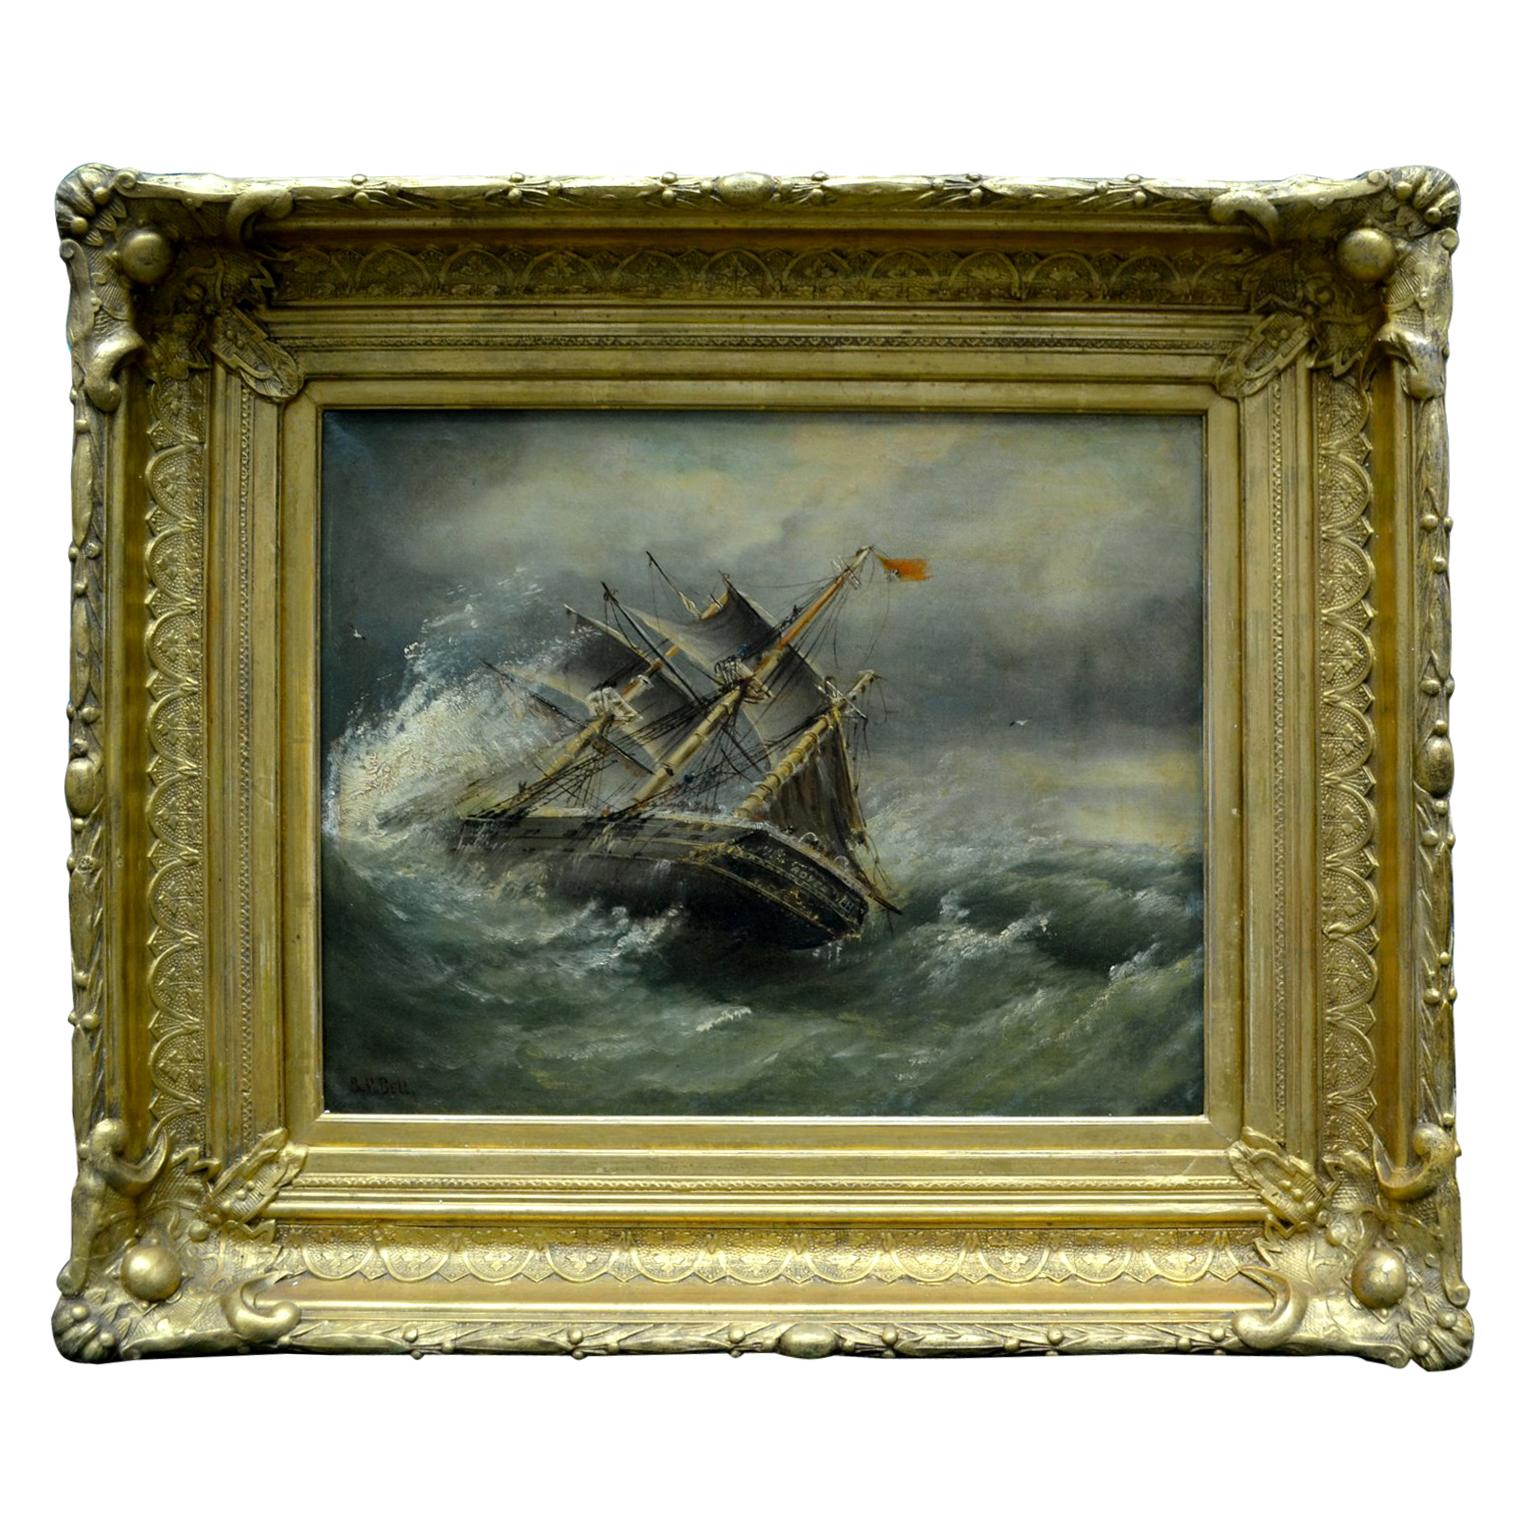 The oil painting on canvas depicts a partial side view of the three masted British Galleon named 'Rover' being tossed around in a stormy sea to the point the ship is almost capsizing. It is uncertain what the ultimate fate of the ship will be. The